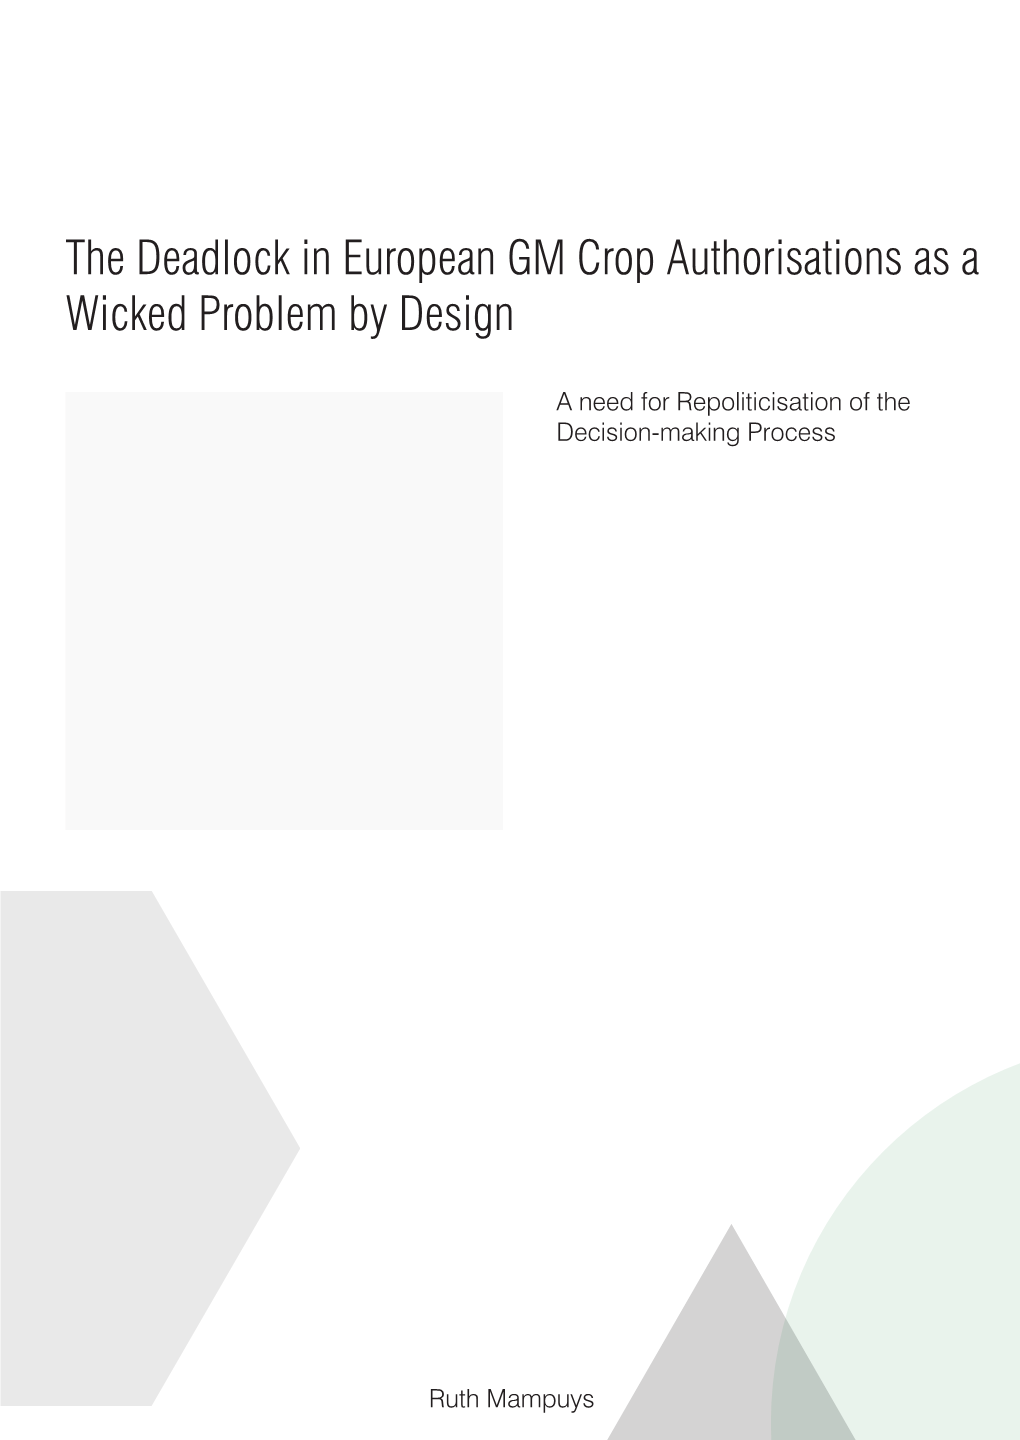 The Deadlock in European GM Crop Authorisations As a Wicked Problem by Design